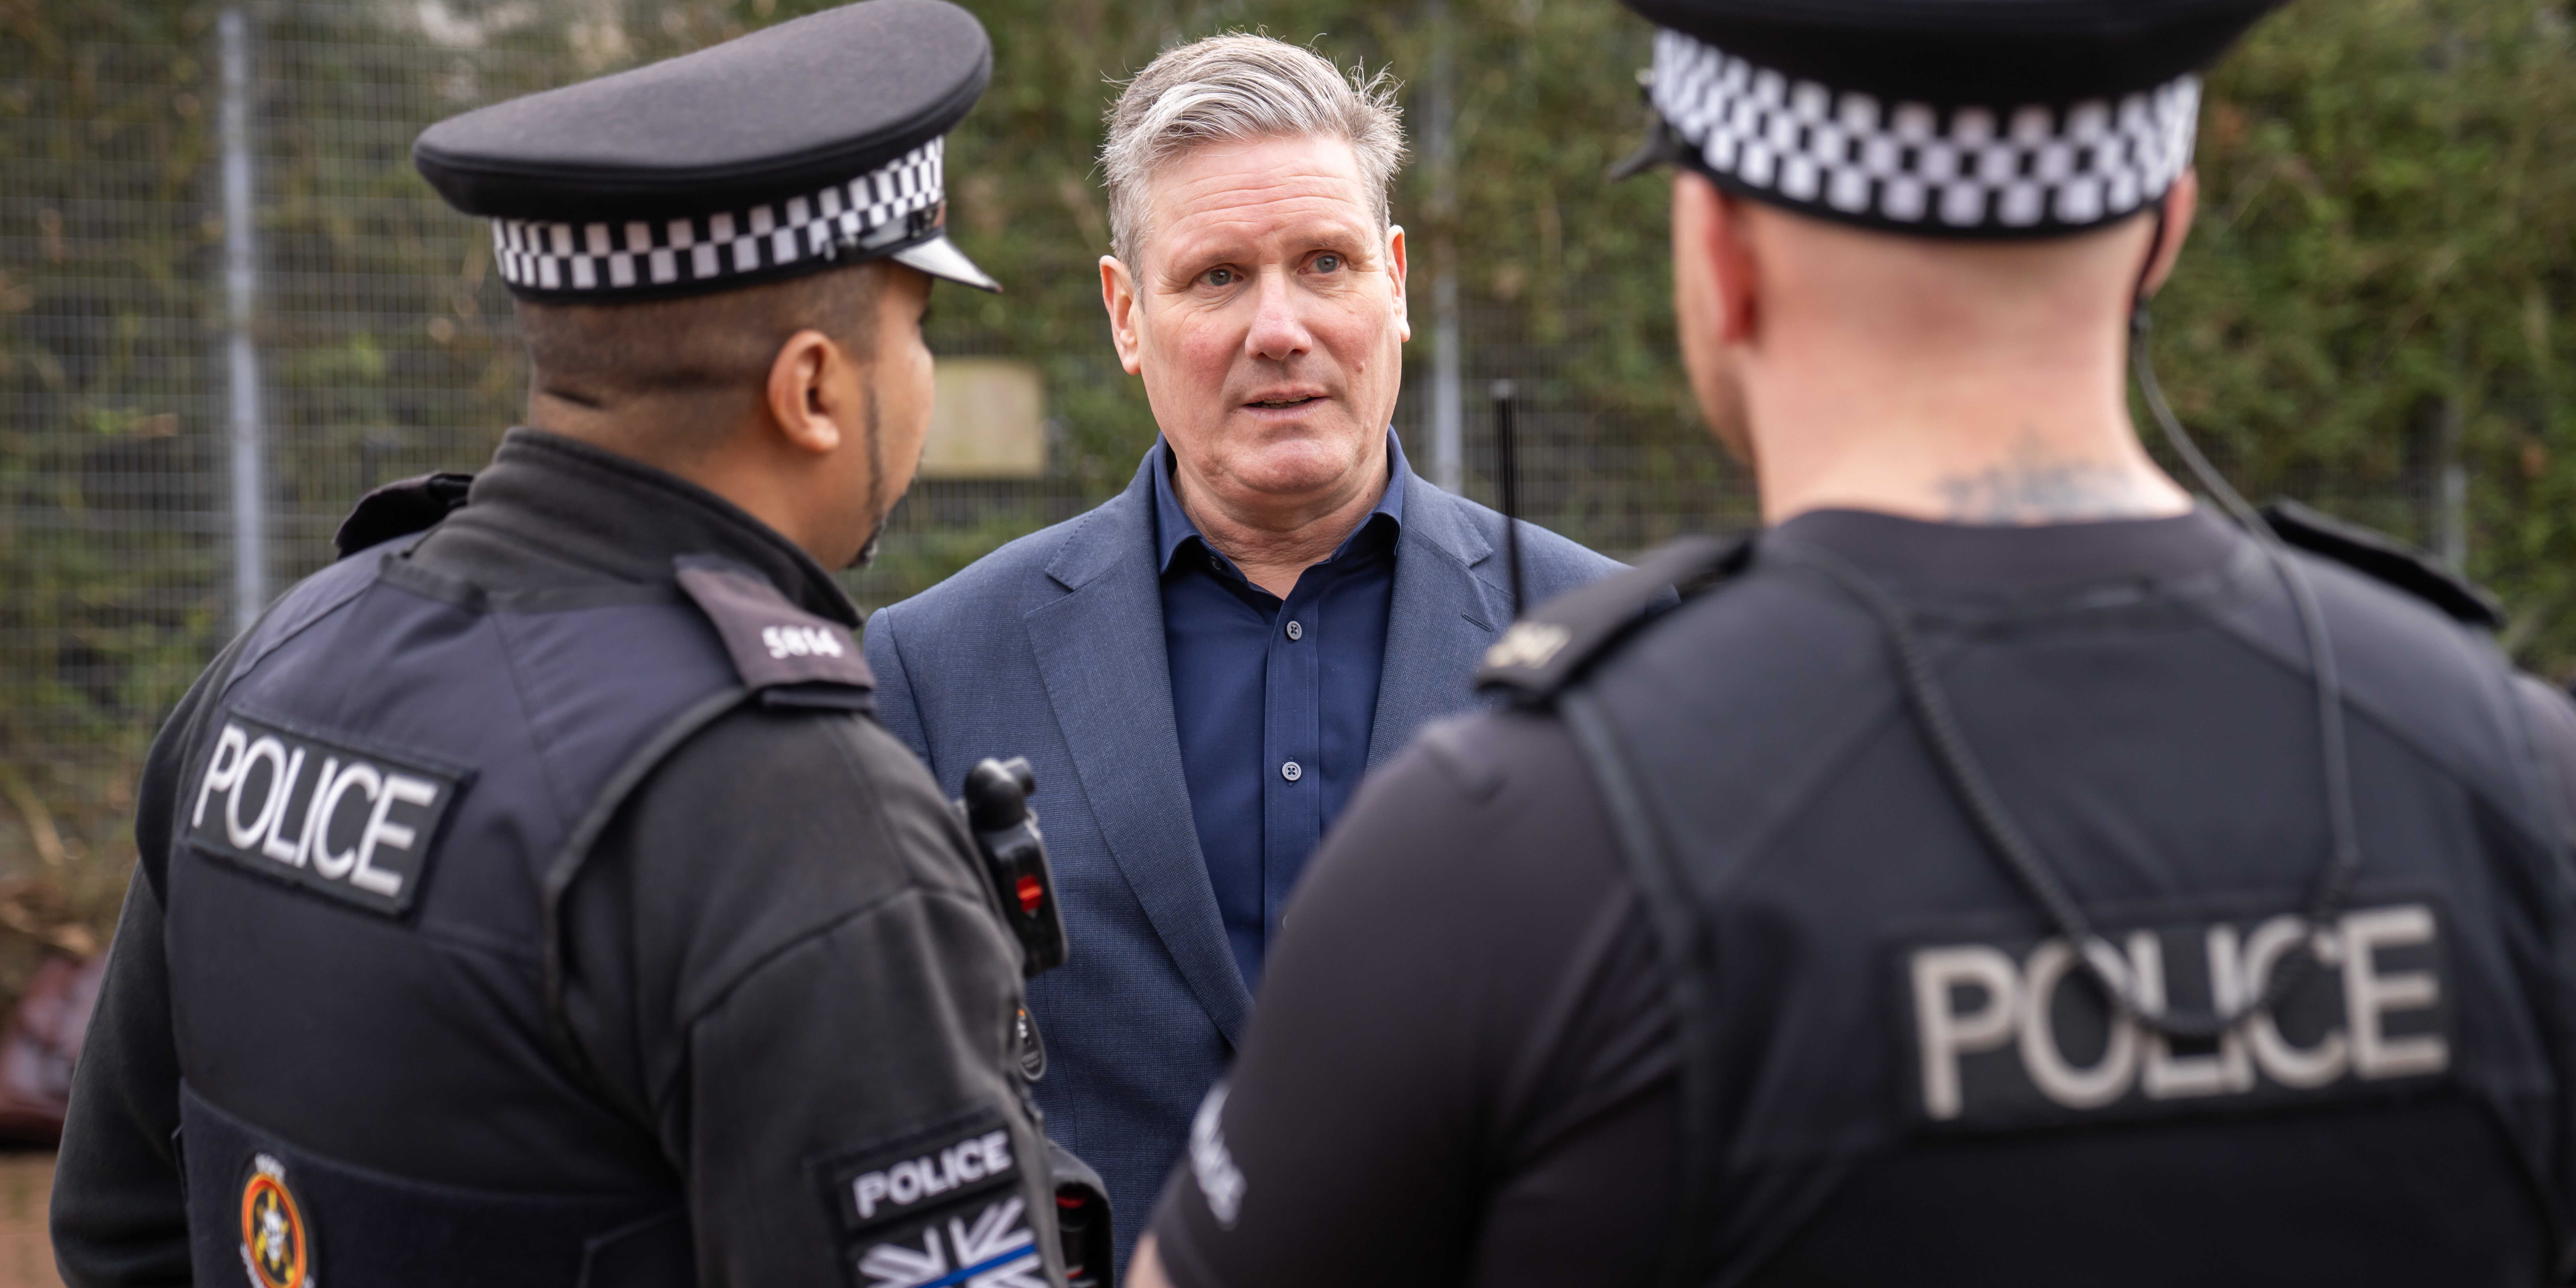 Photo of Keir Starmer facing the camera and speaking to two police officers with their backs to the camers